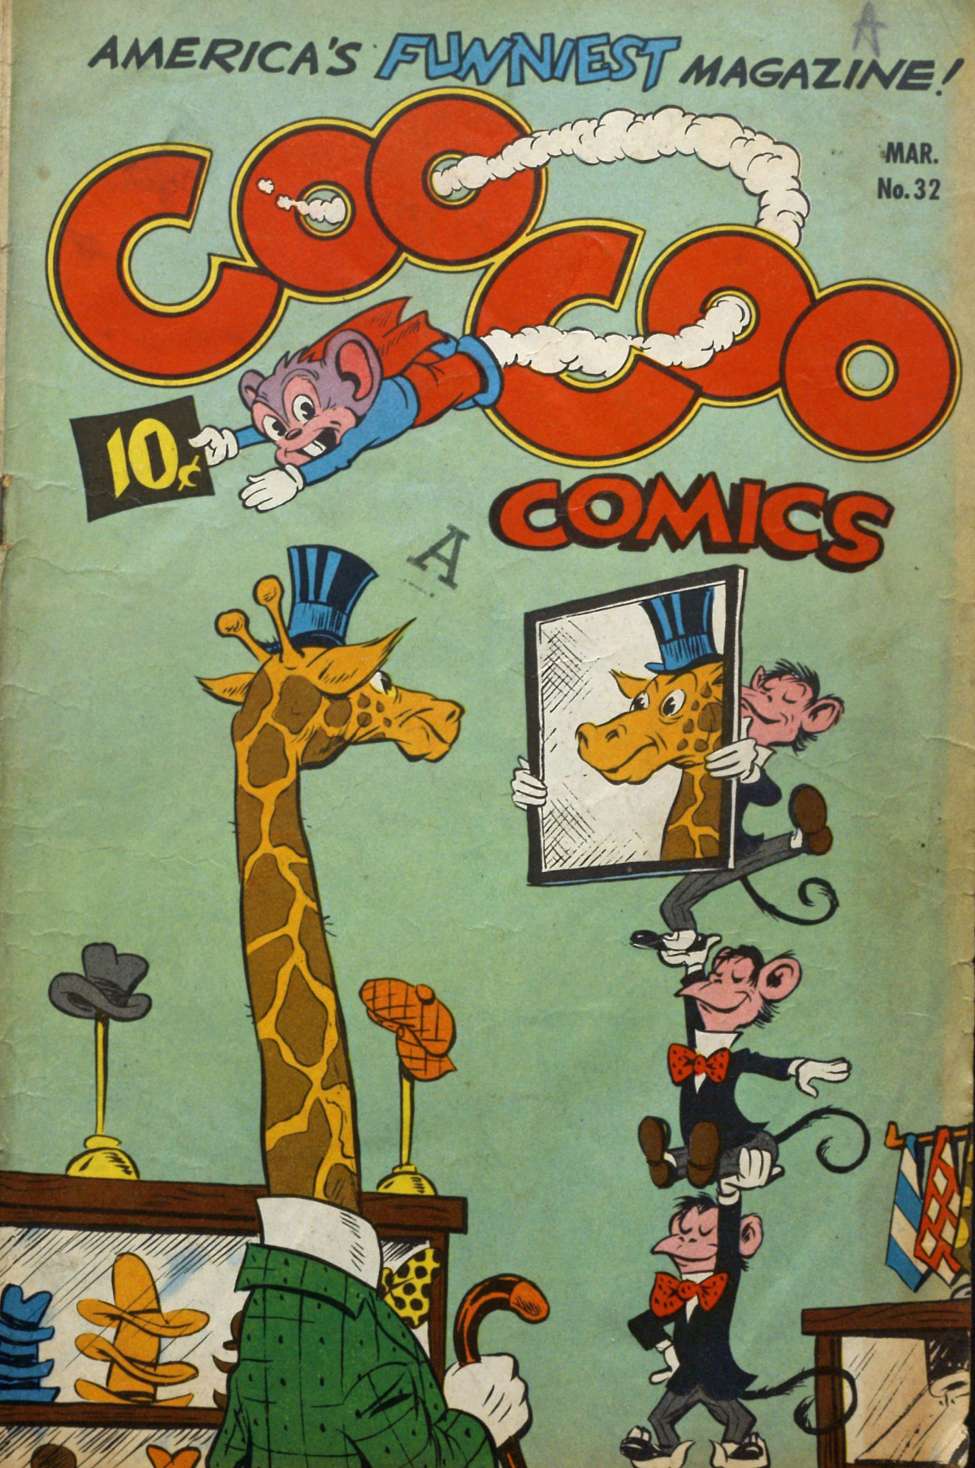 Comic Book Cover For Coo Coo Comics 32 (alt) - Version 1